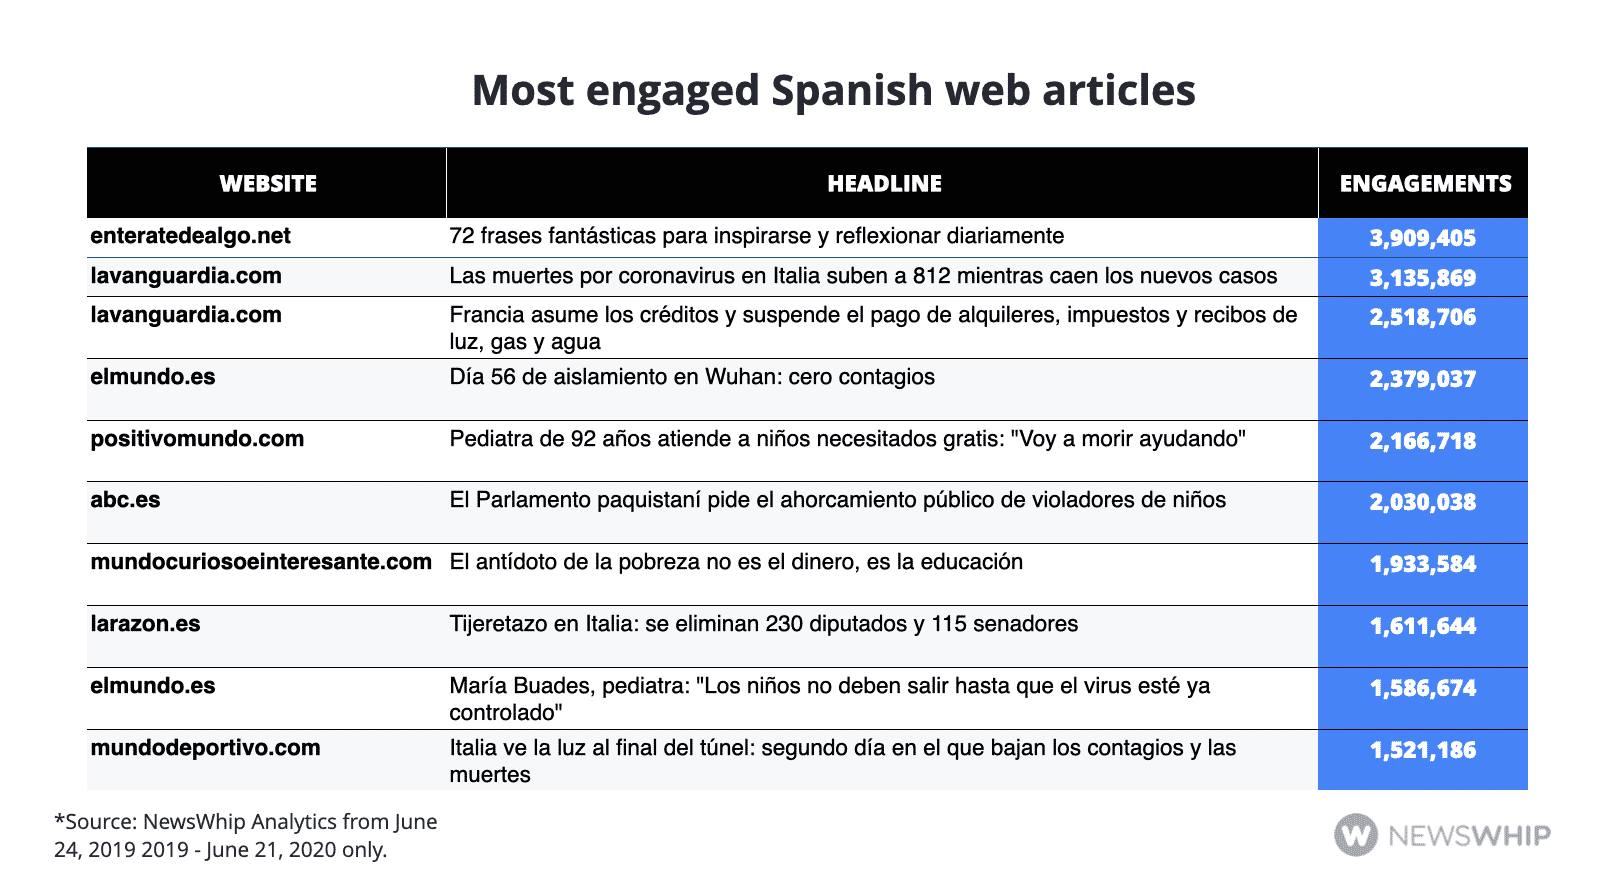 Chart showing the most engaged Spanish web articles, ranked by engagement 